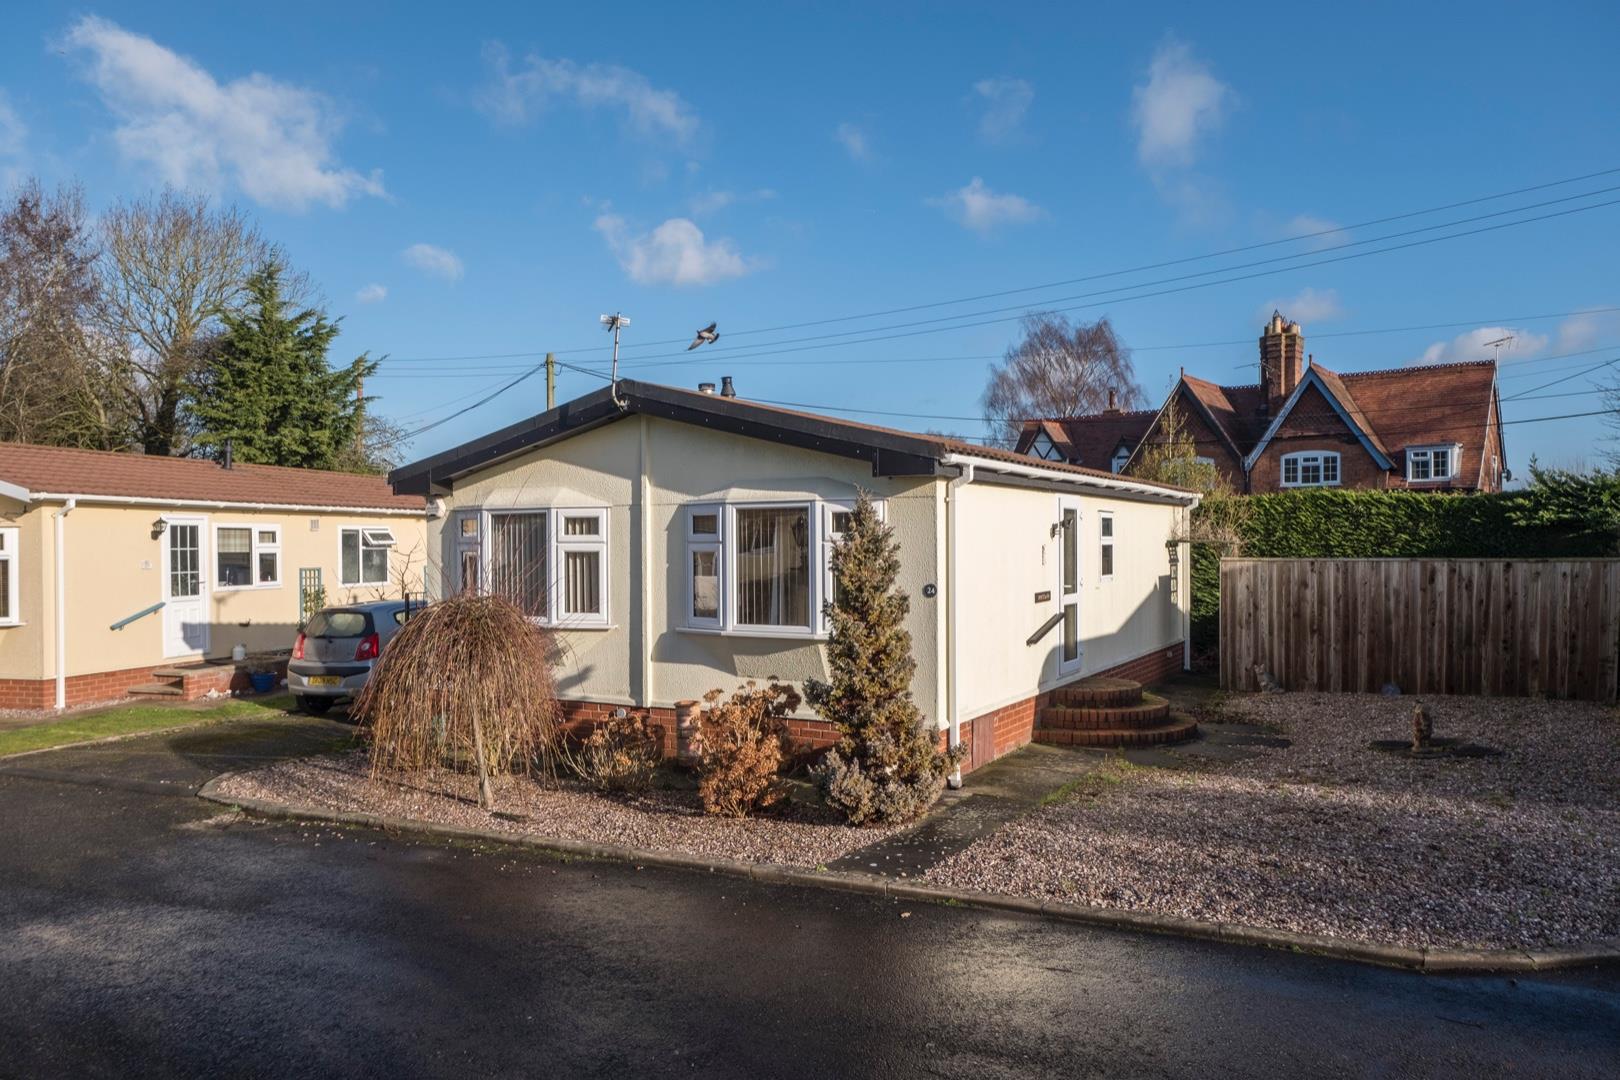 2 bedroom  Detached Bungalow for Sale in Spurstow